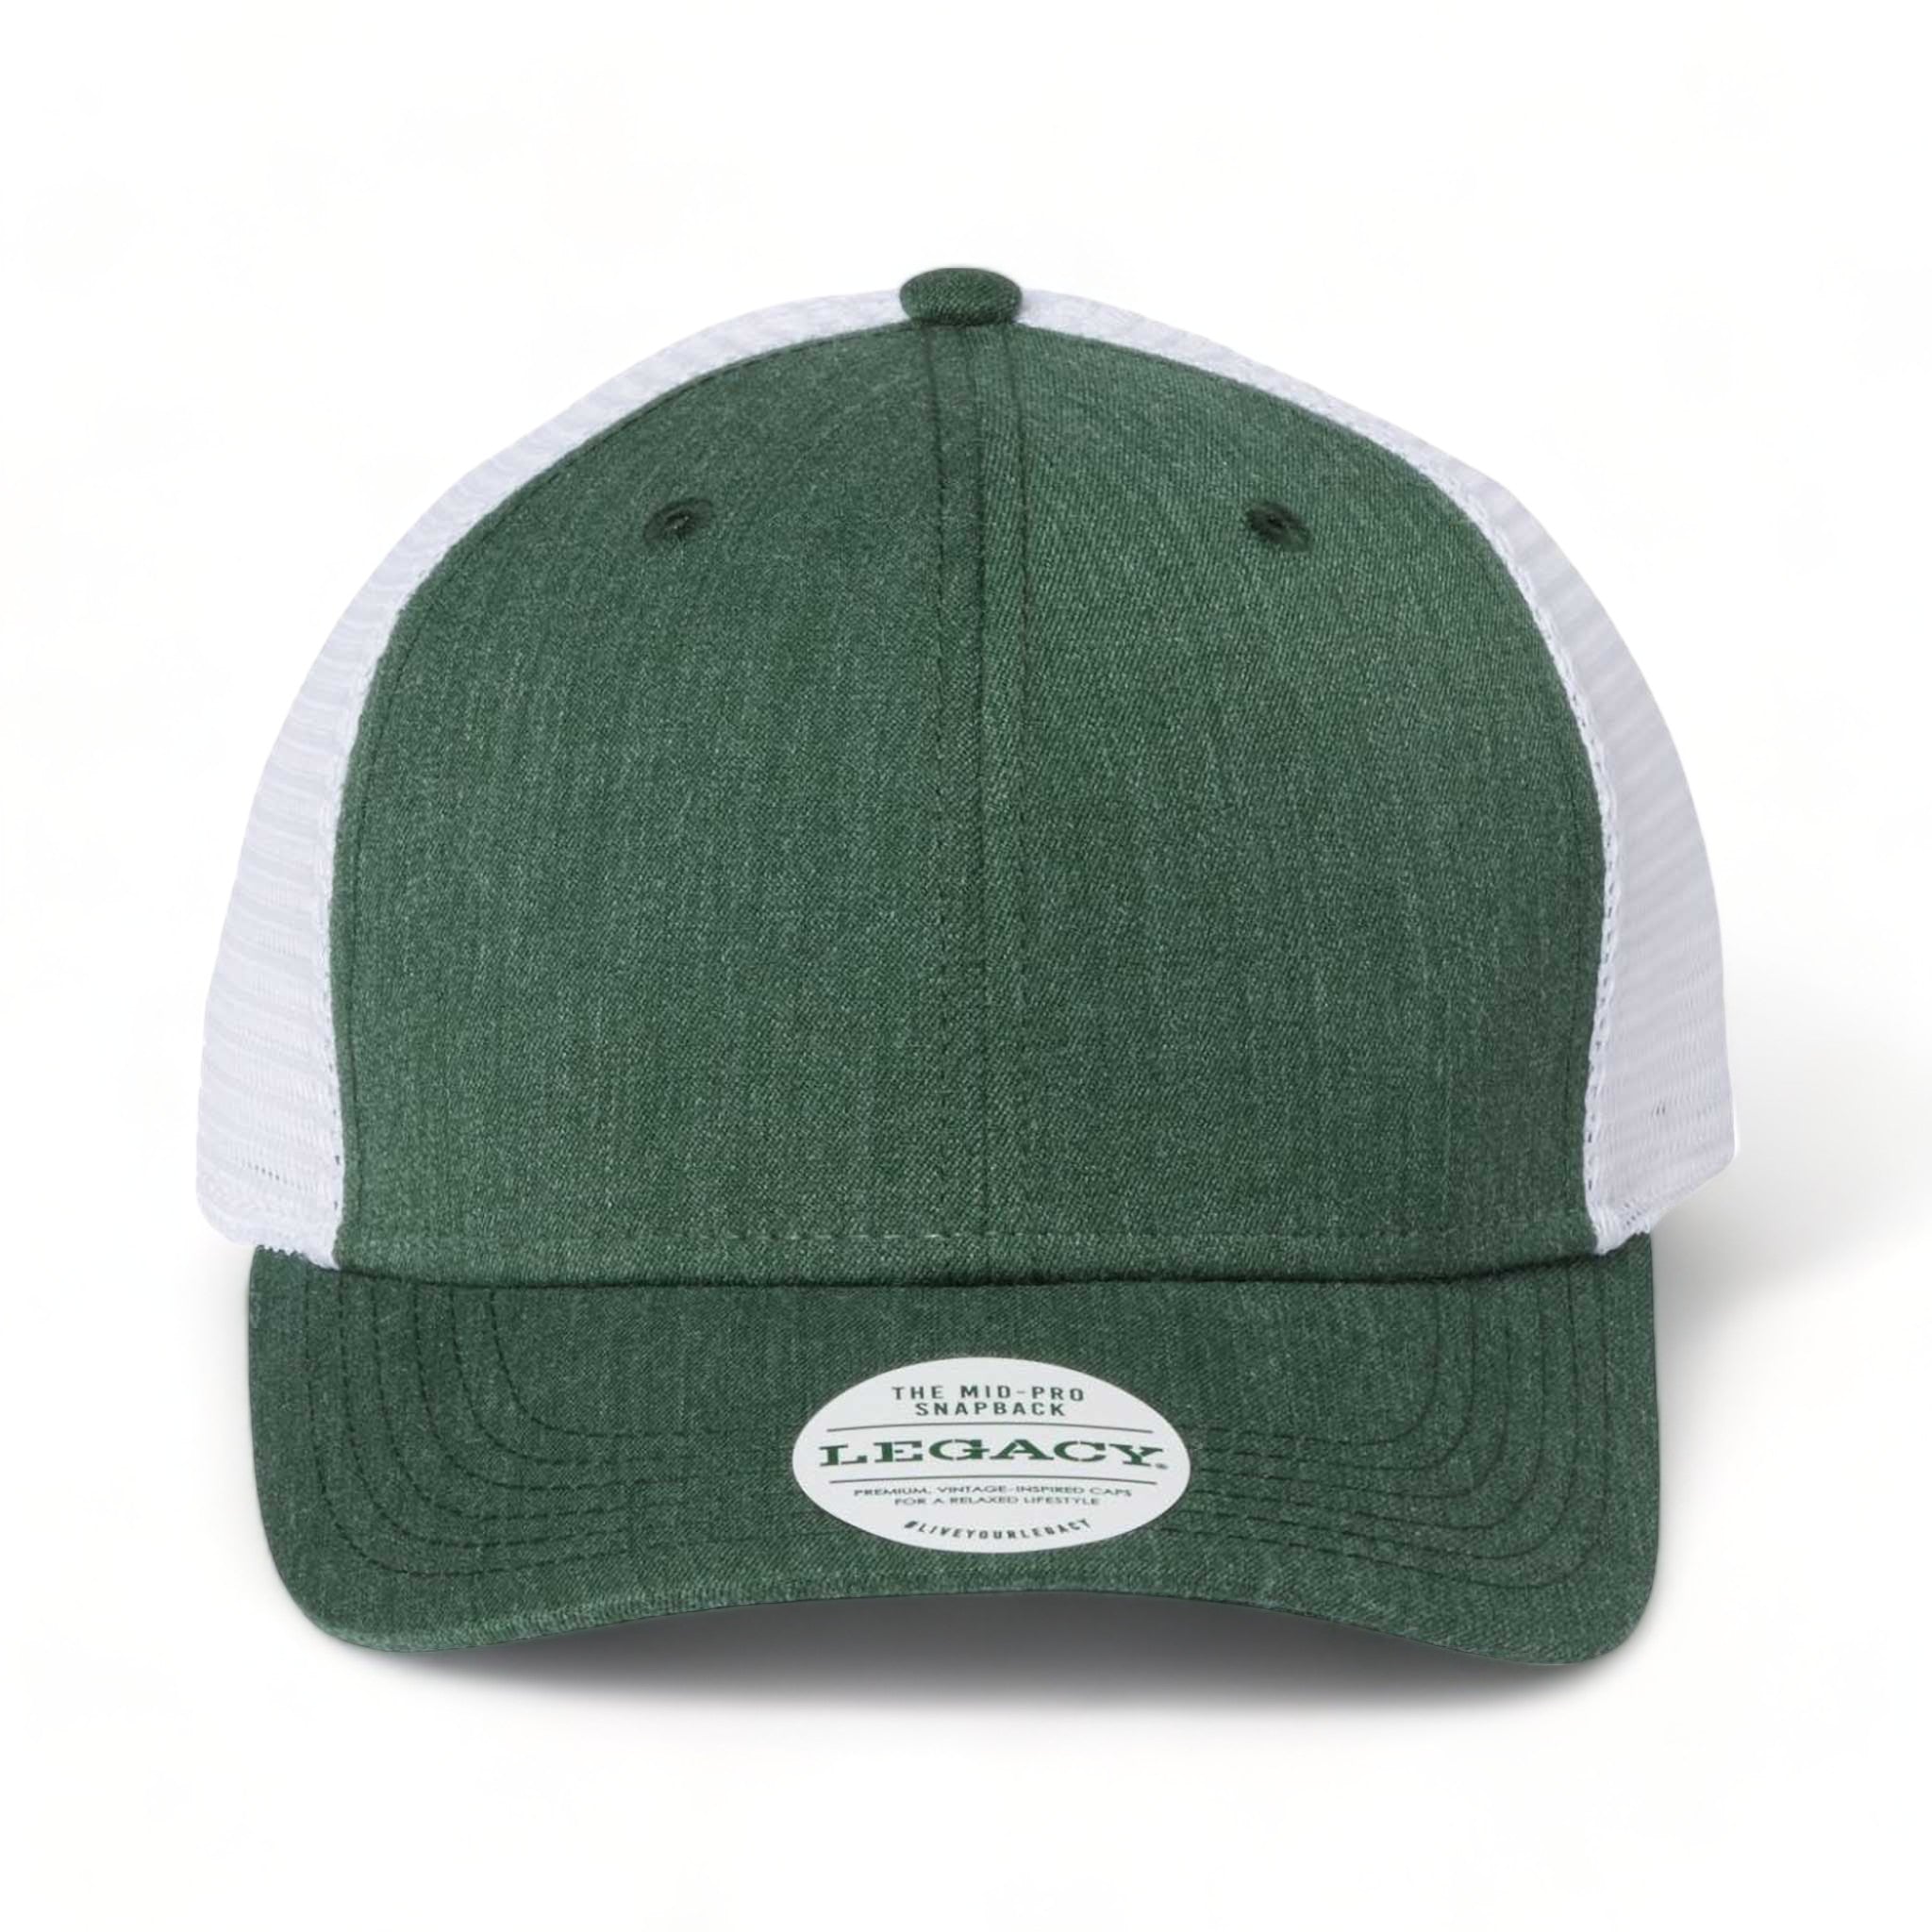 Front view of LEGACY MPS custom hat in mélange dark green and white